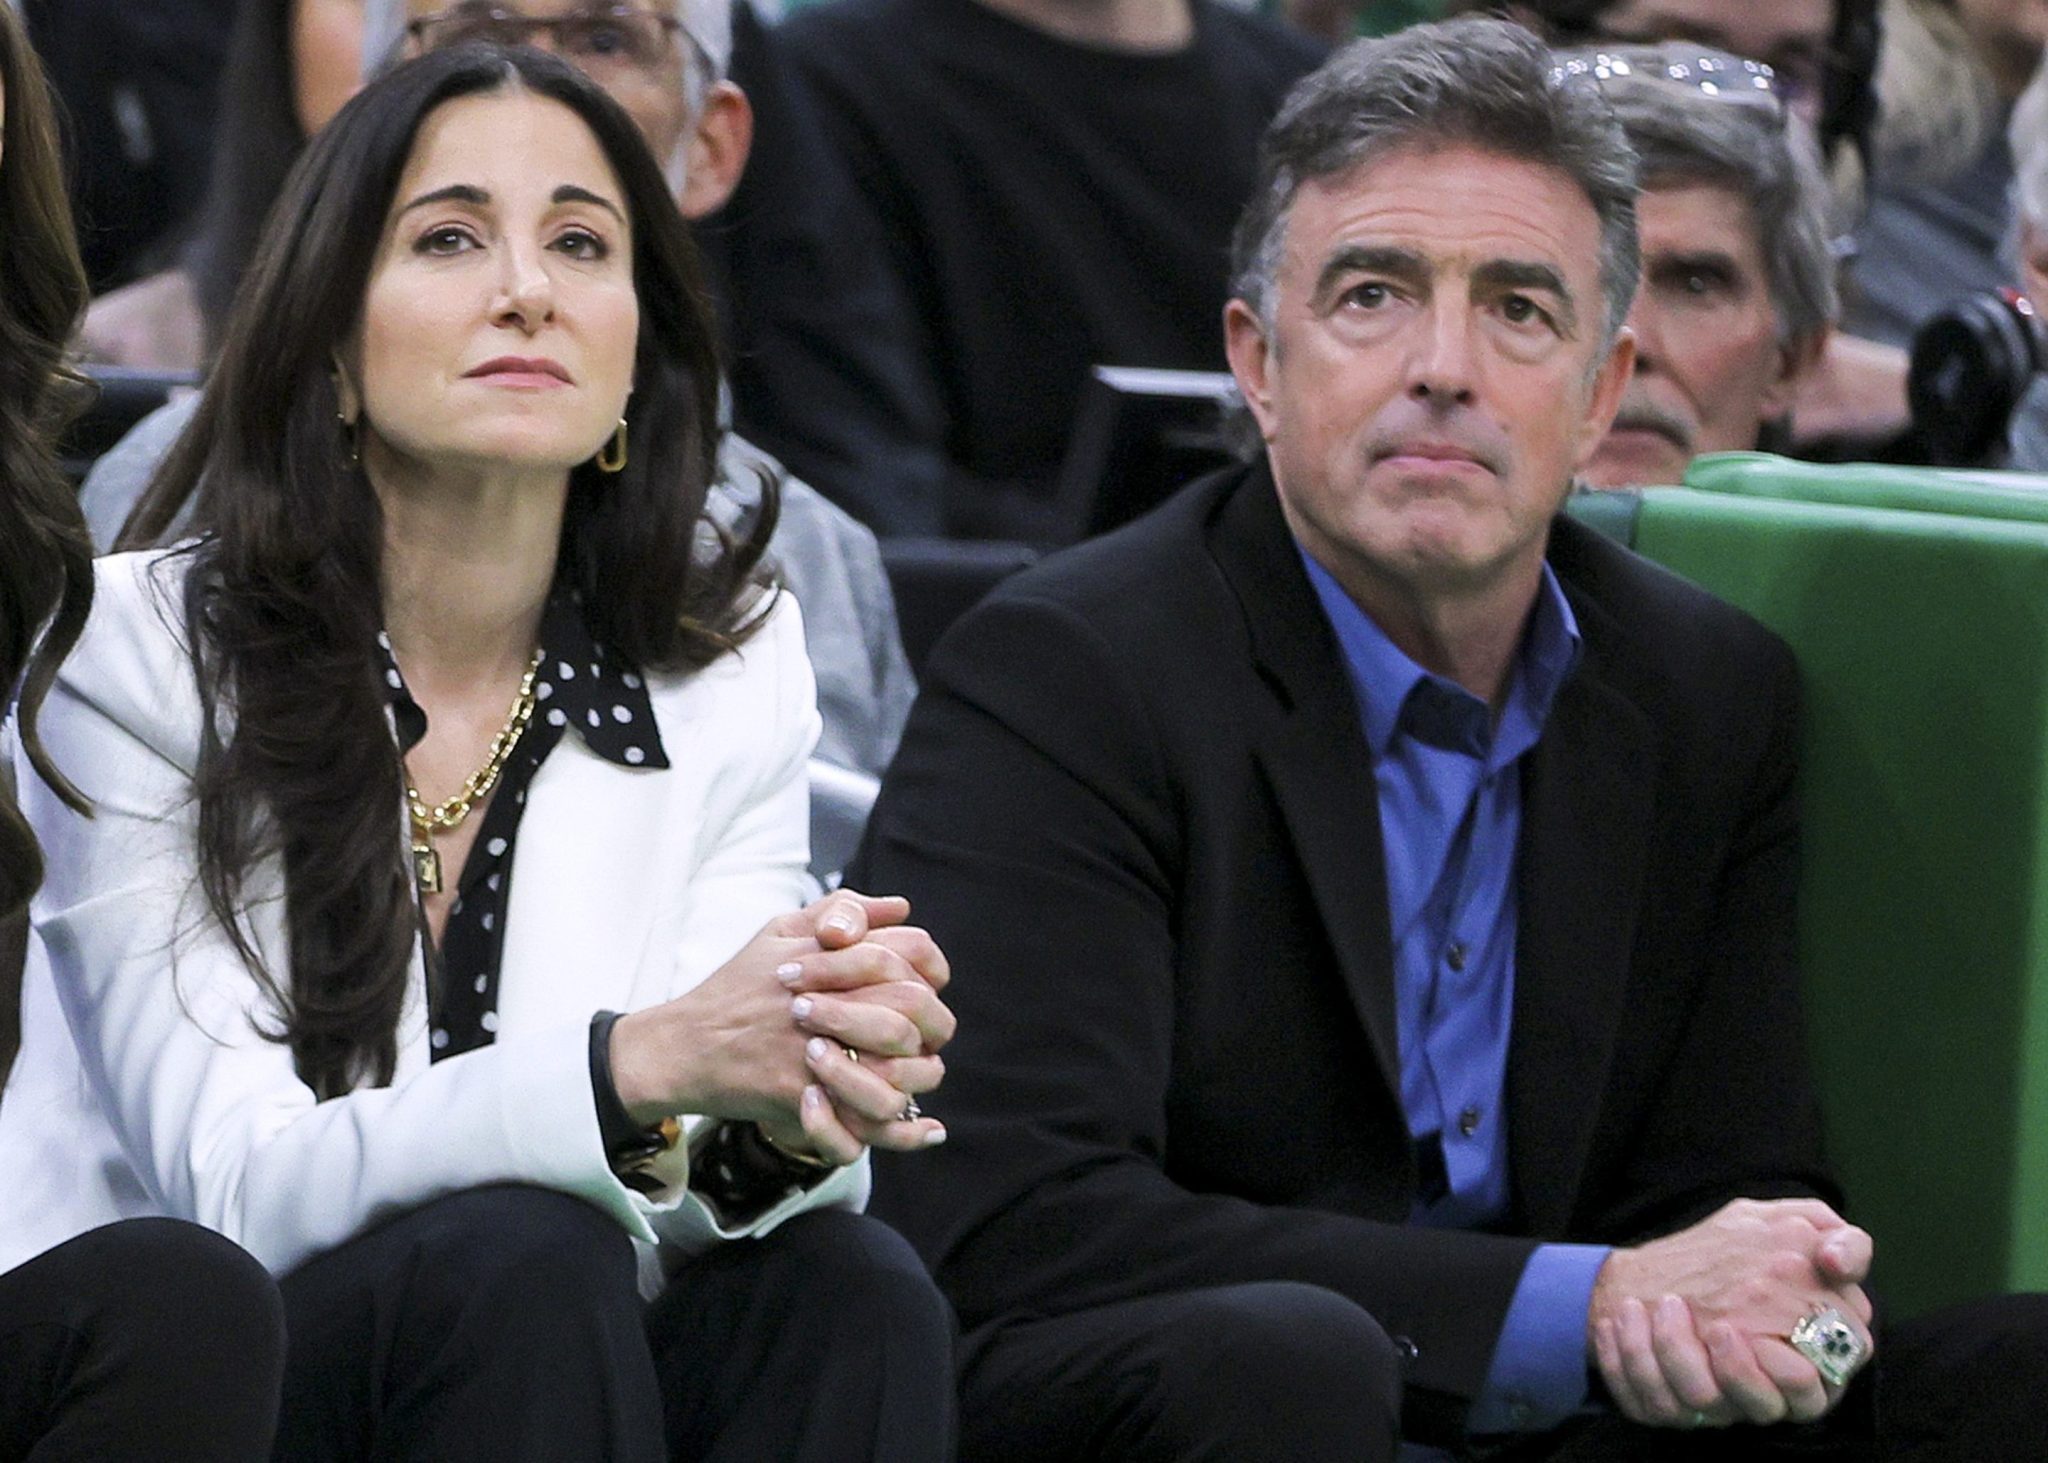 Boston Celtics owner Wyc Grousbeck produces NBC sitcom ‘Extended Family’ about himself